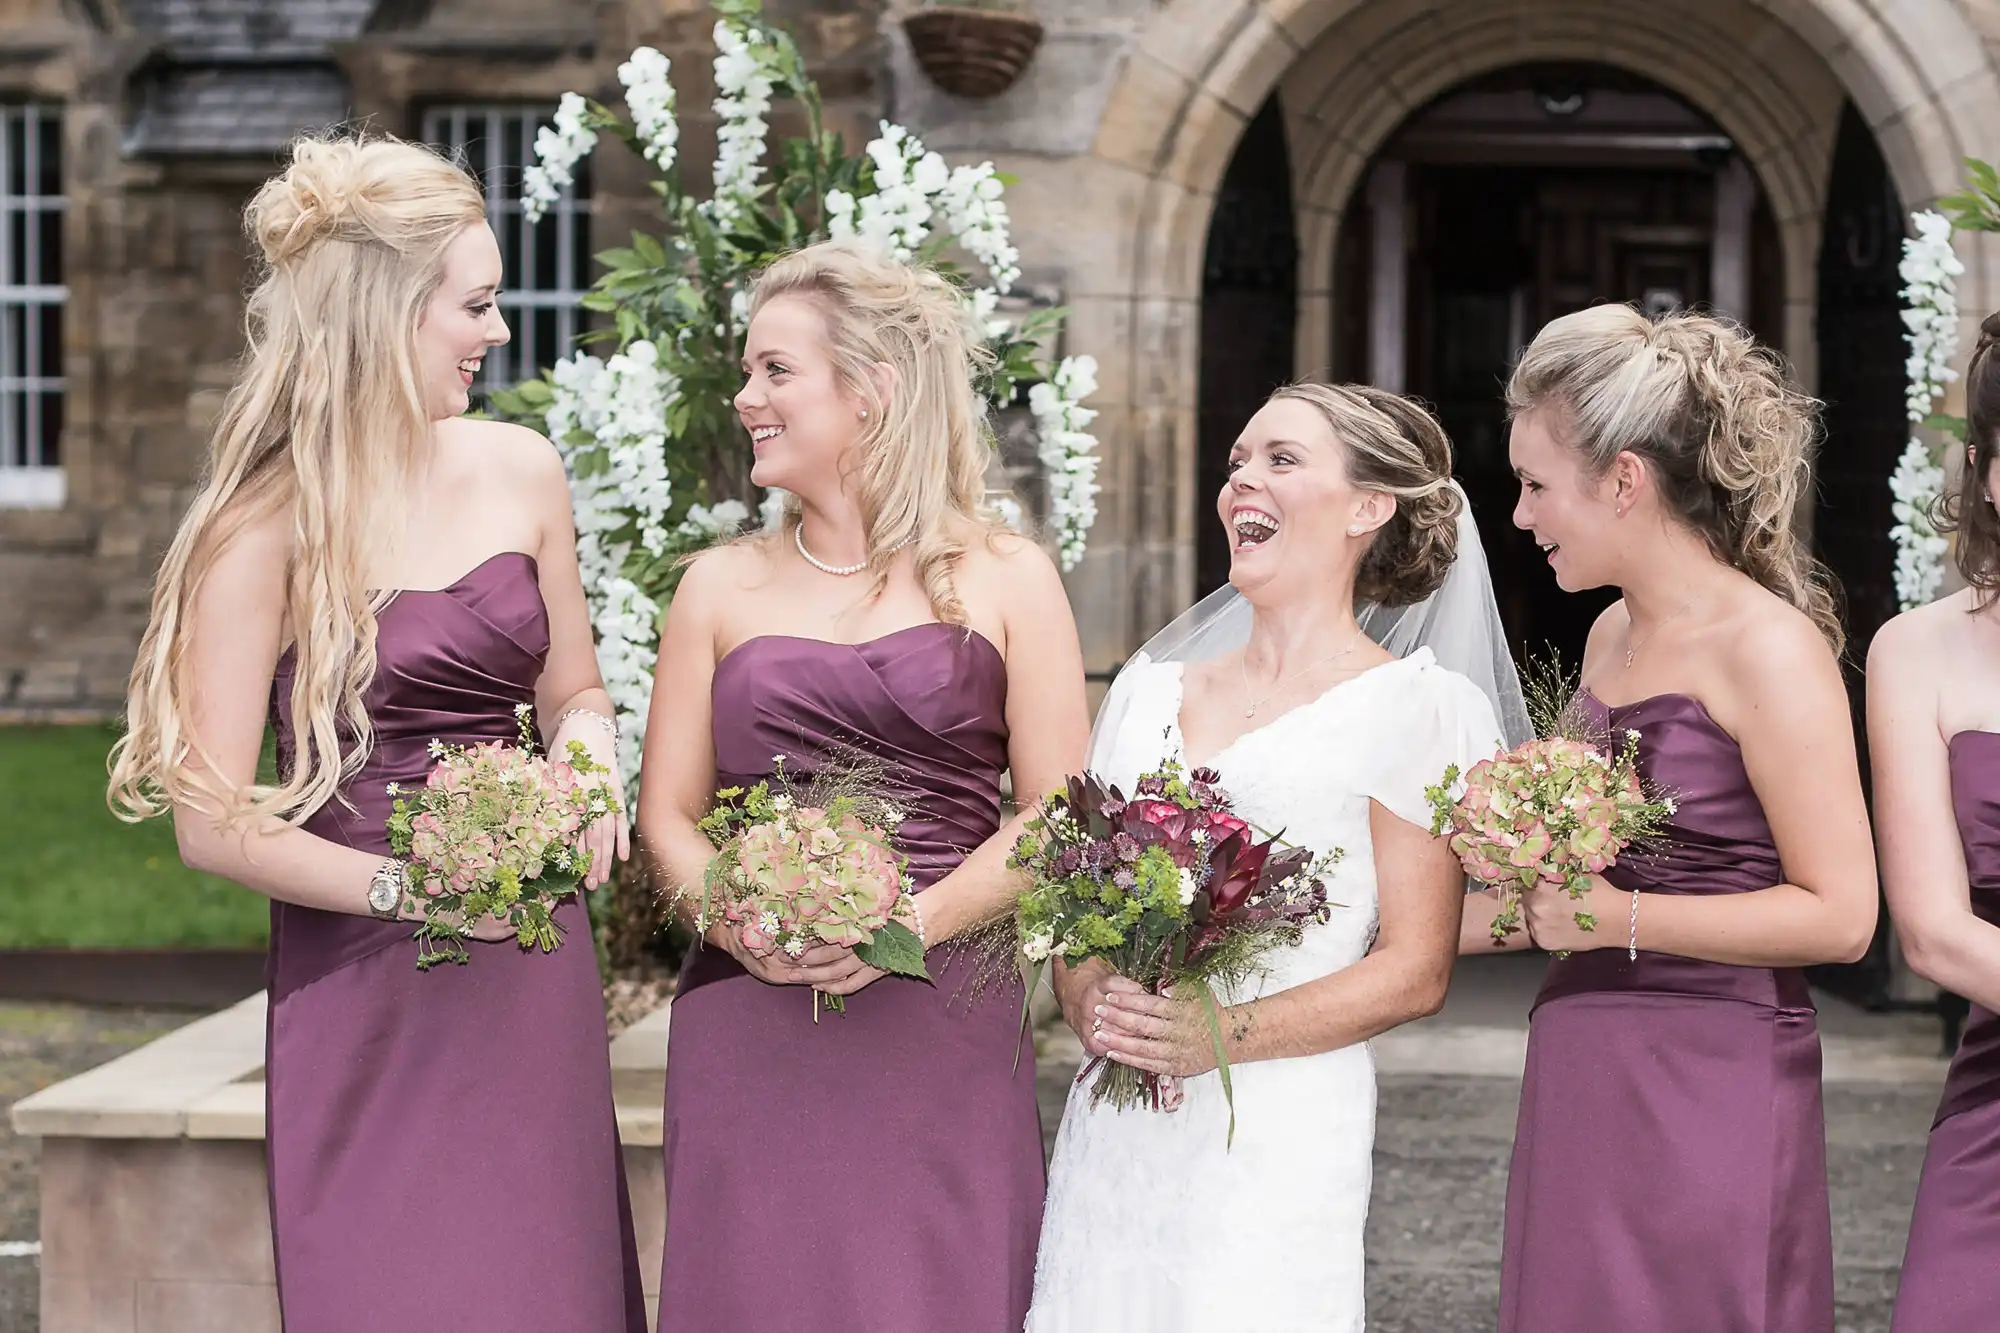 A bride in a white dress laughing joyfully with four bridesmaids in burgundy dresses, holding bouquets, in front of an old stone building.